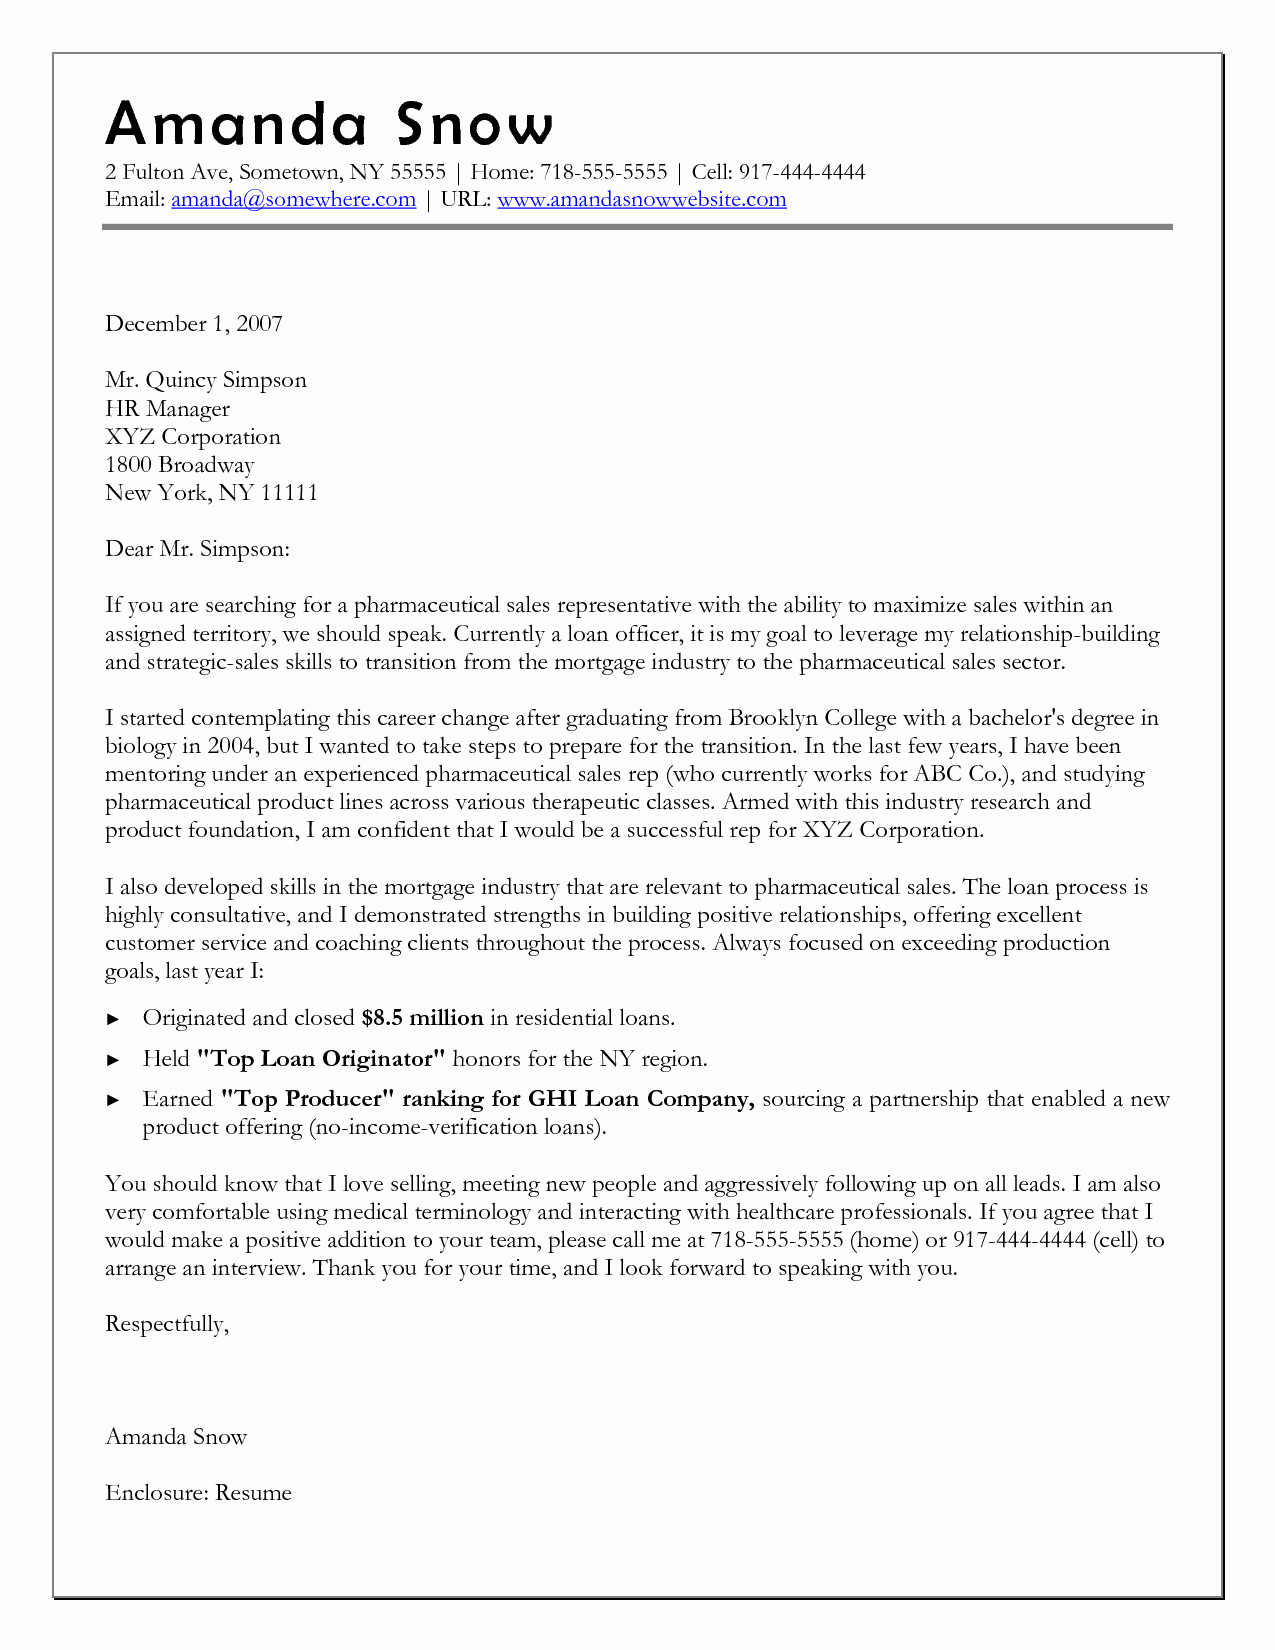 Sample Cover Letters Career Change Best Of Career Change Cover Letter